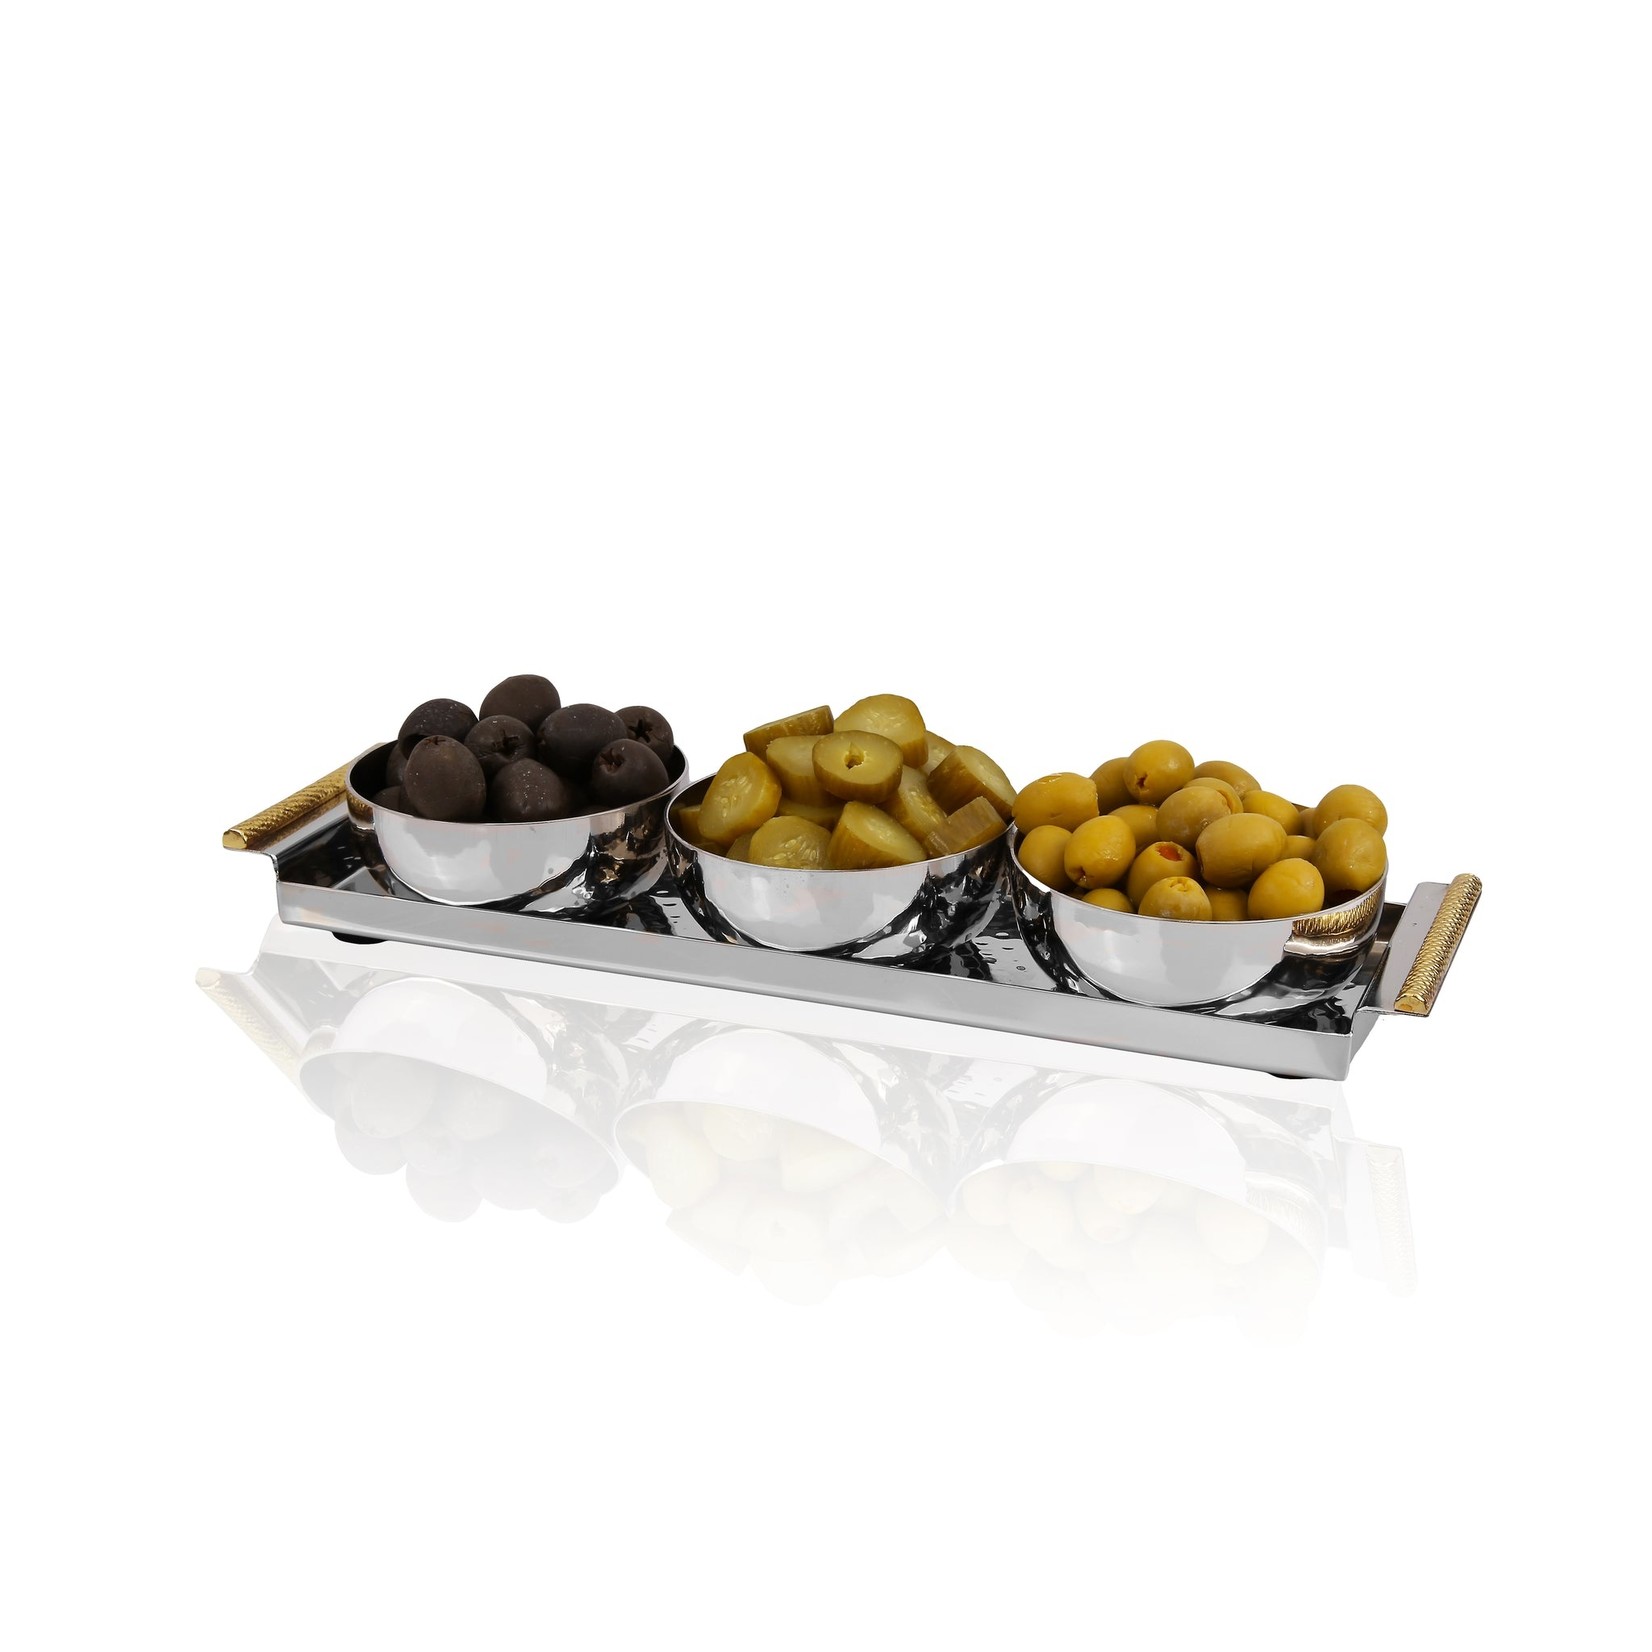 TWS SPRT59 3 Bowl Relish Dish w Rectangle Tray and Gold Handles, Goldtone Collection- 12"L